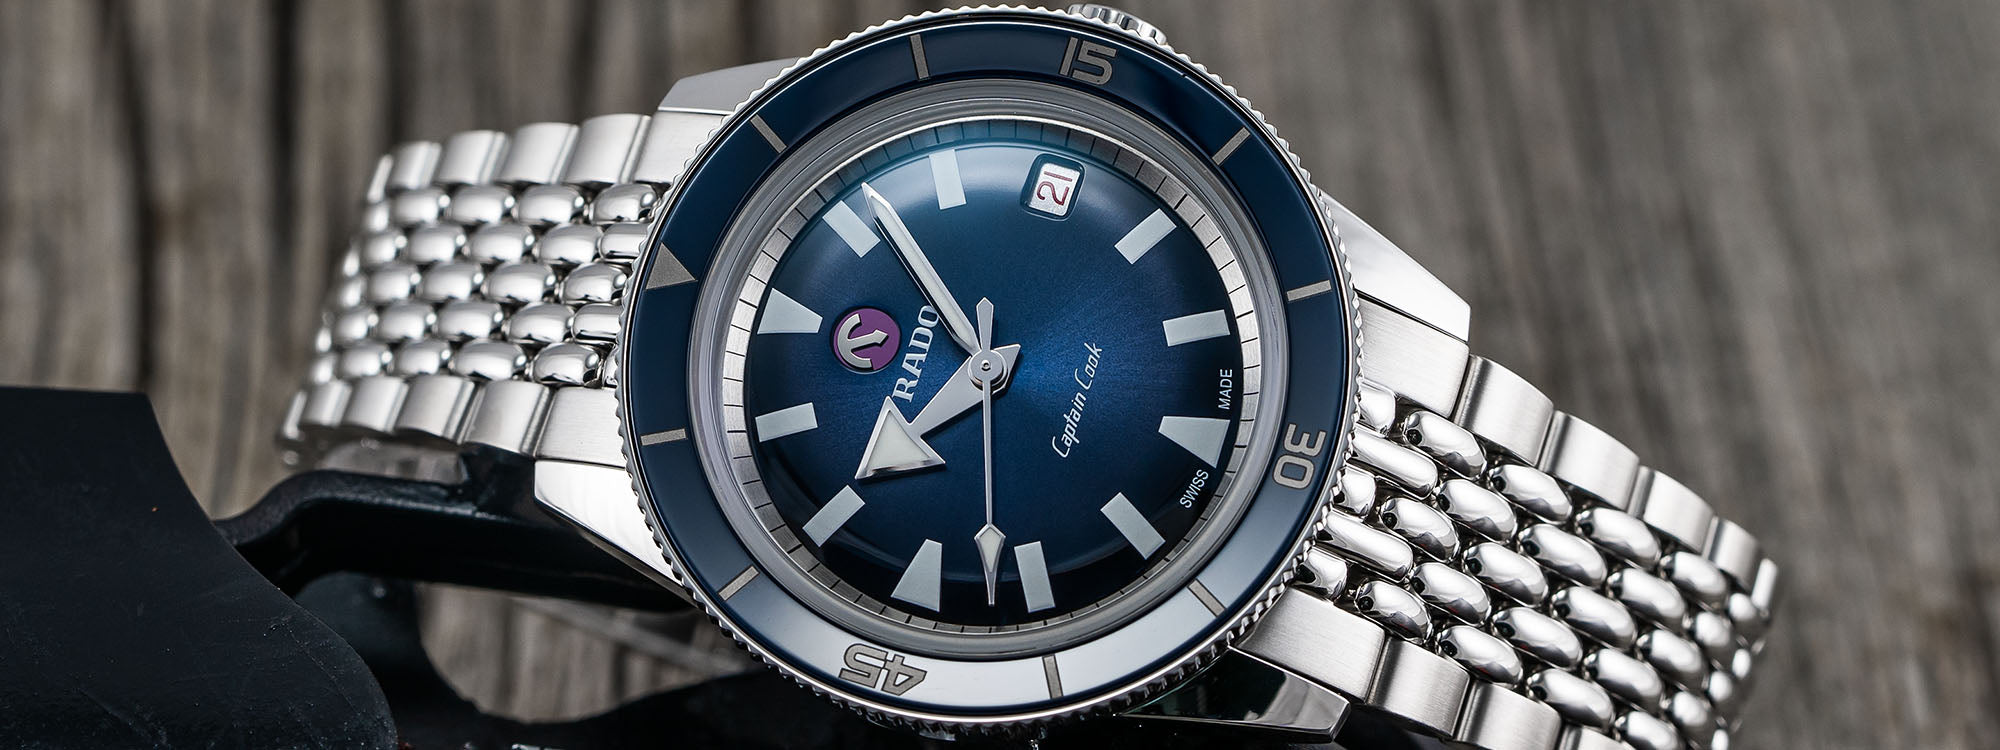 What You Should Know Before Buying the Rado Captain Cook